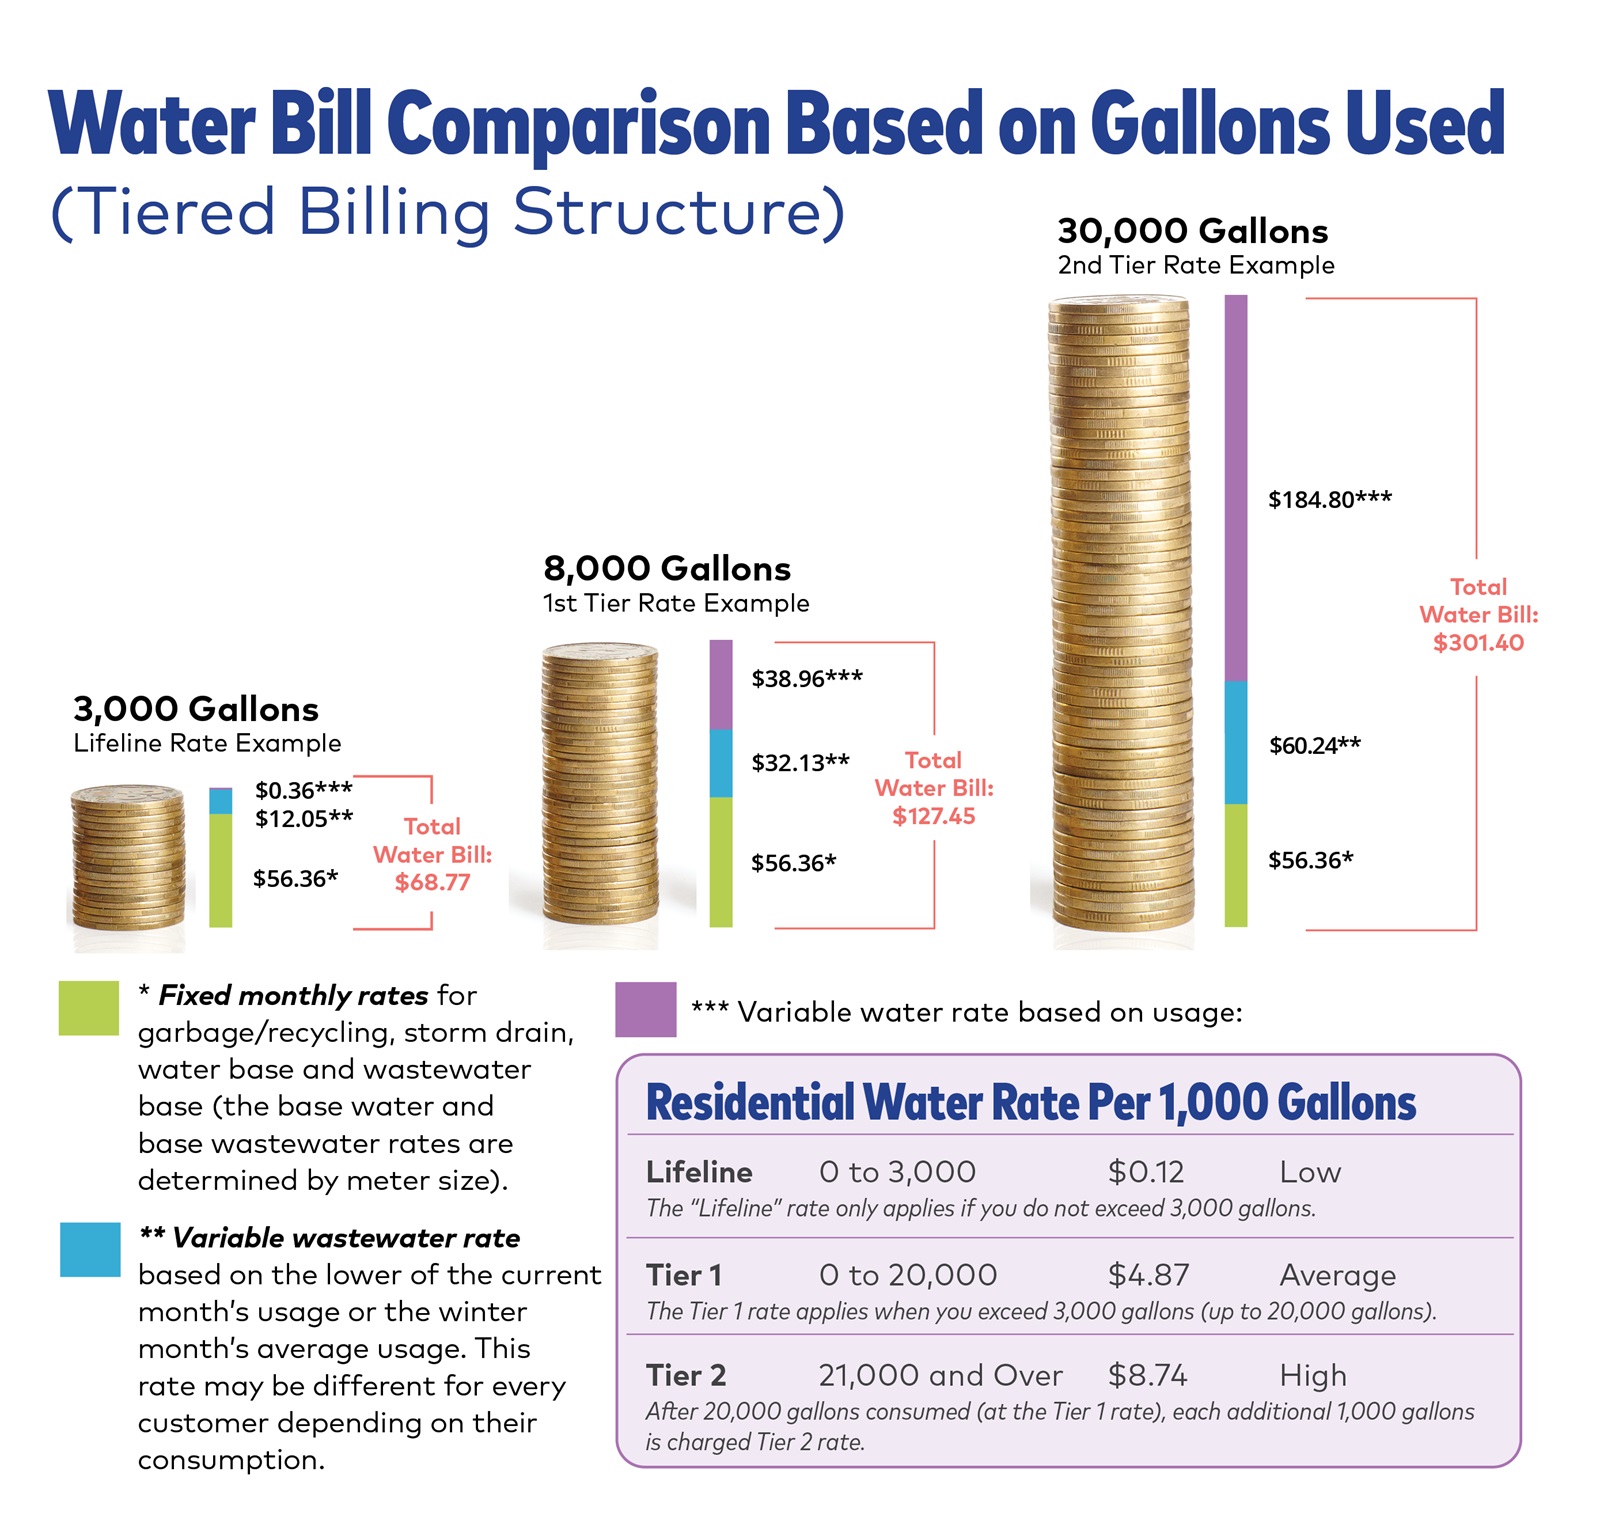 Water Bill Comparison Based on Gallons Used